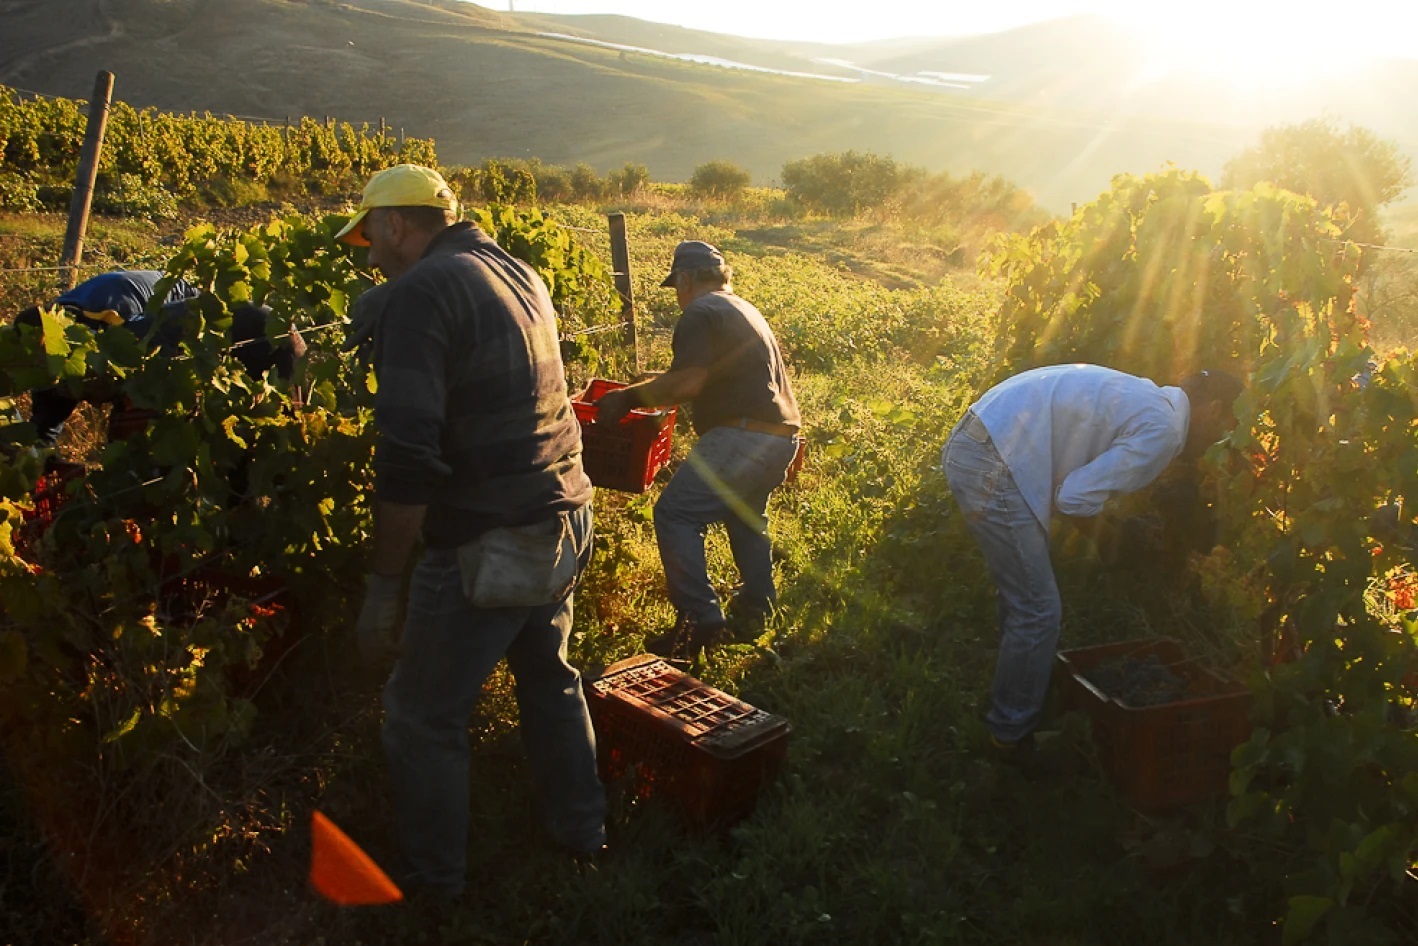 Into the Vines: The Story of Sicily’s Top Winemakers